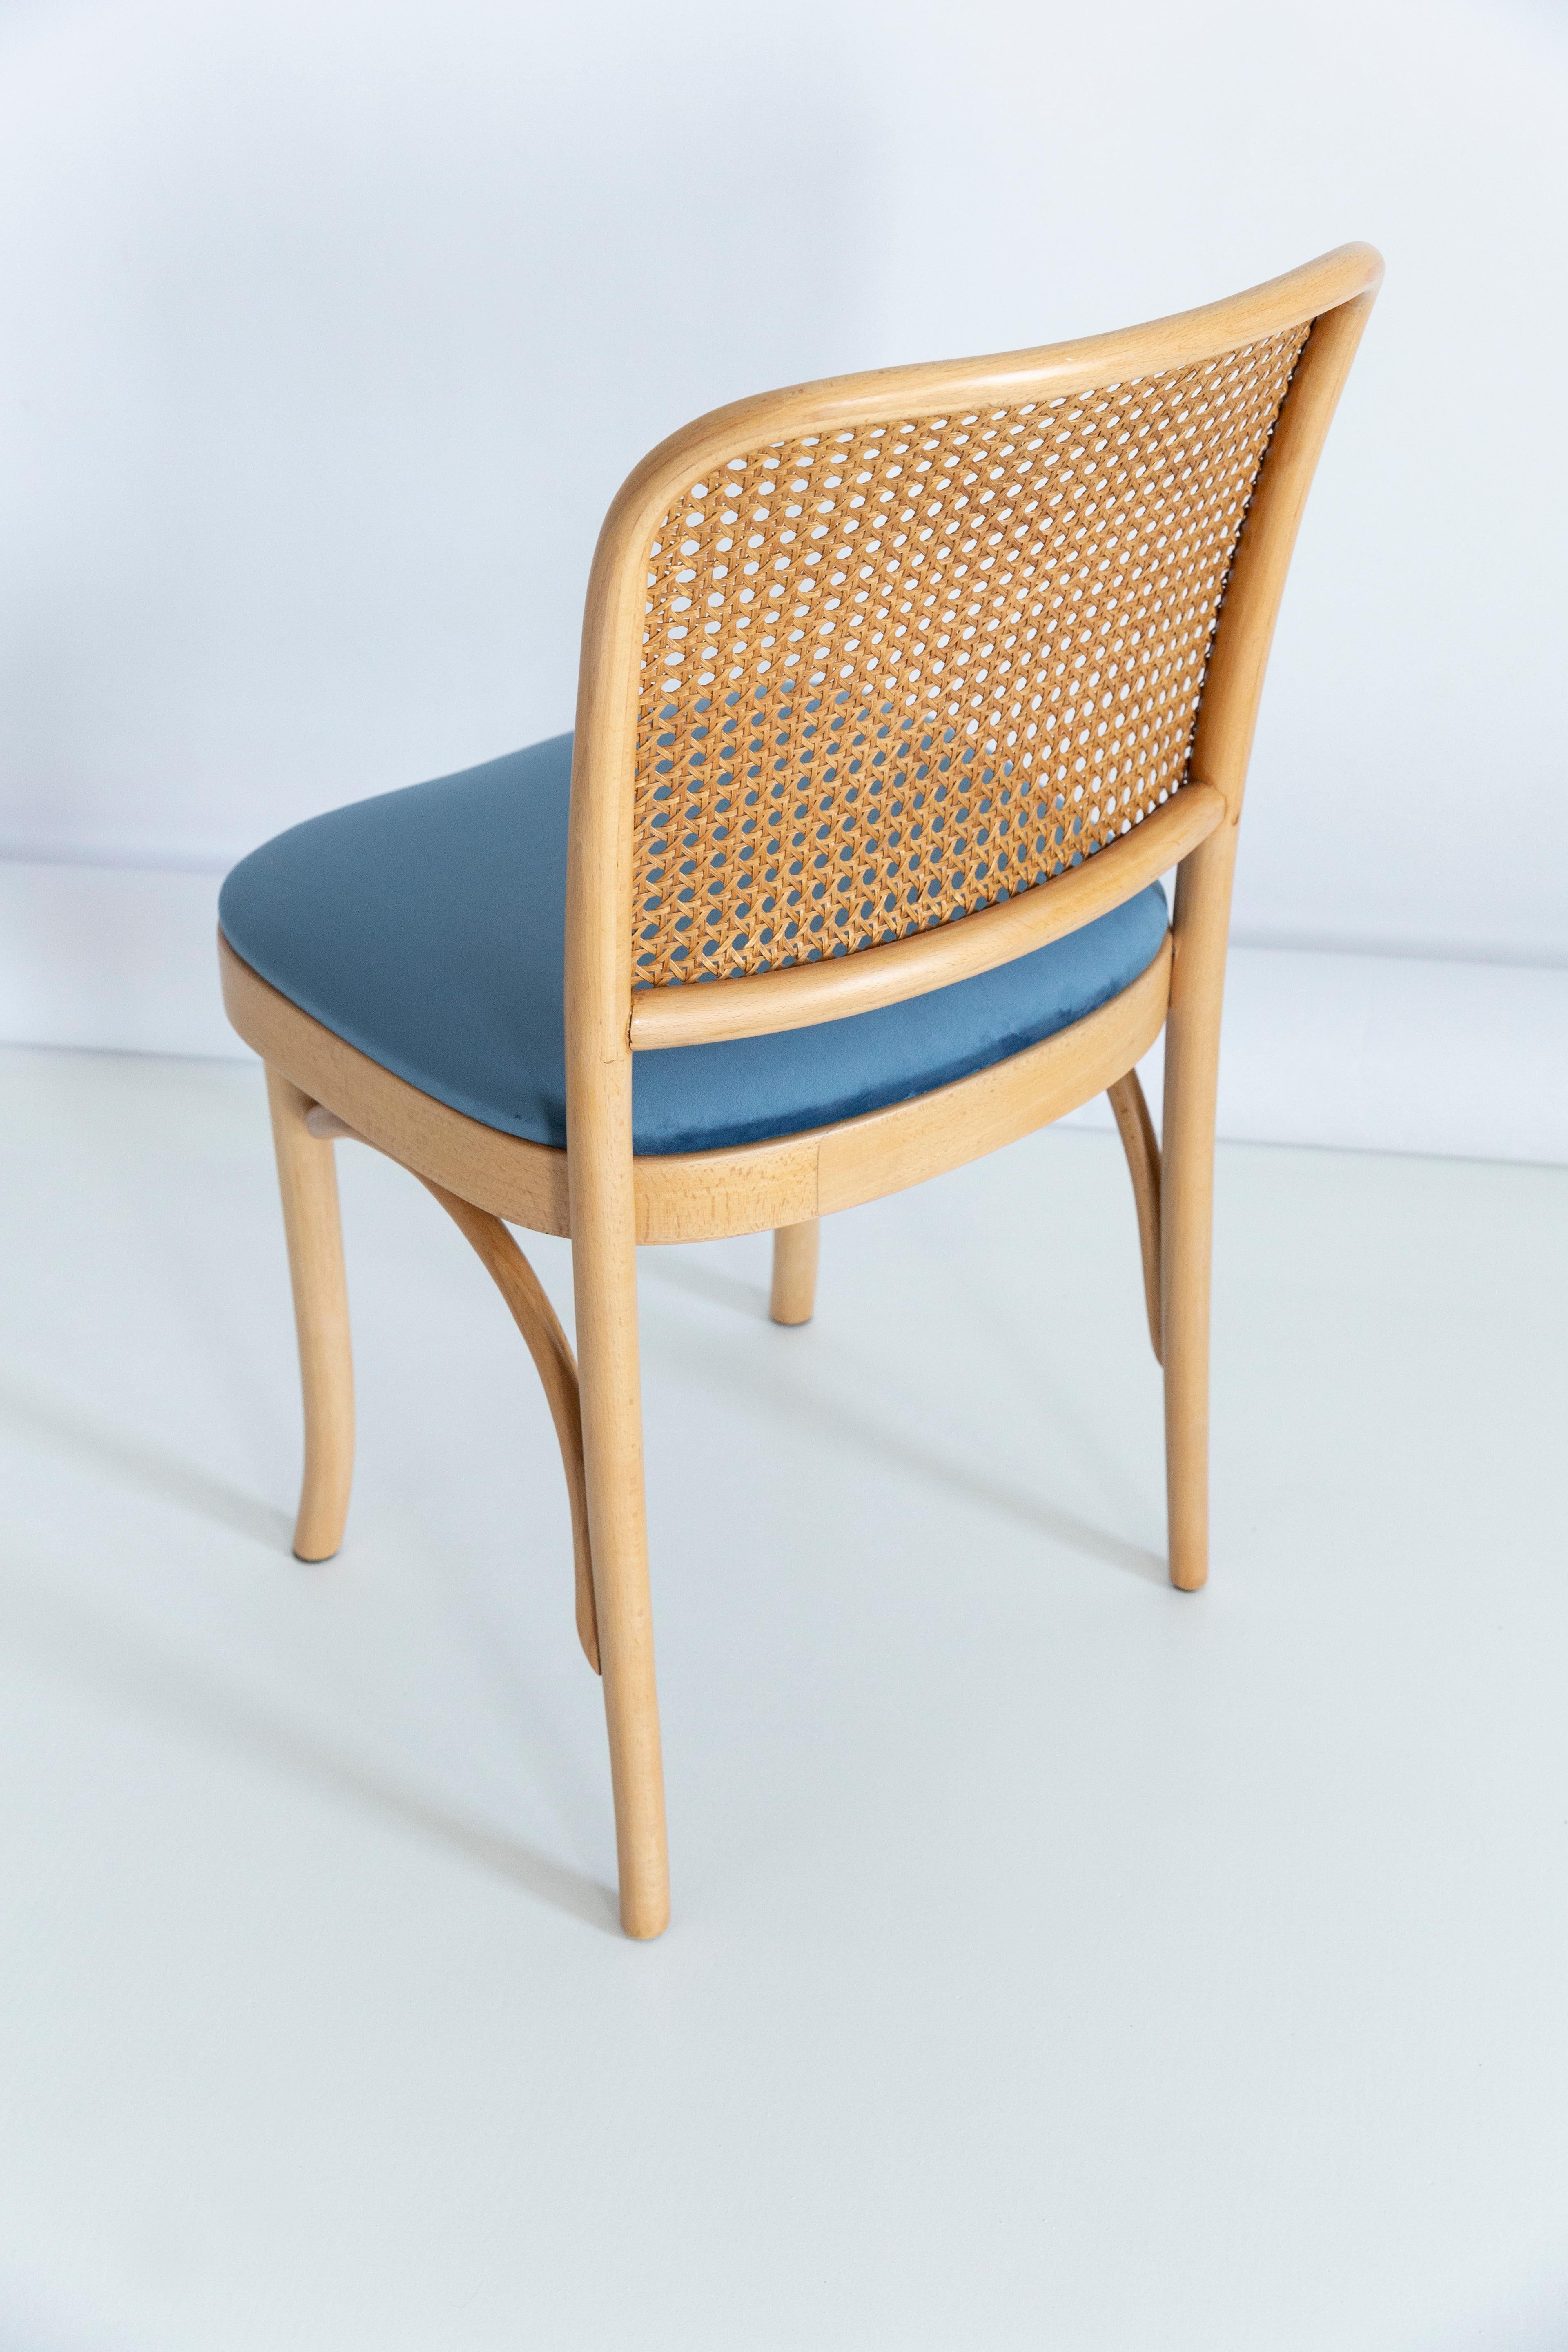 Set of Two Blue Velvet Thonet Wood Rattan Chairs, 1960s For Sale 4